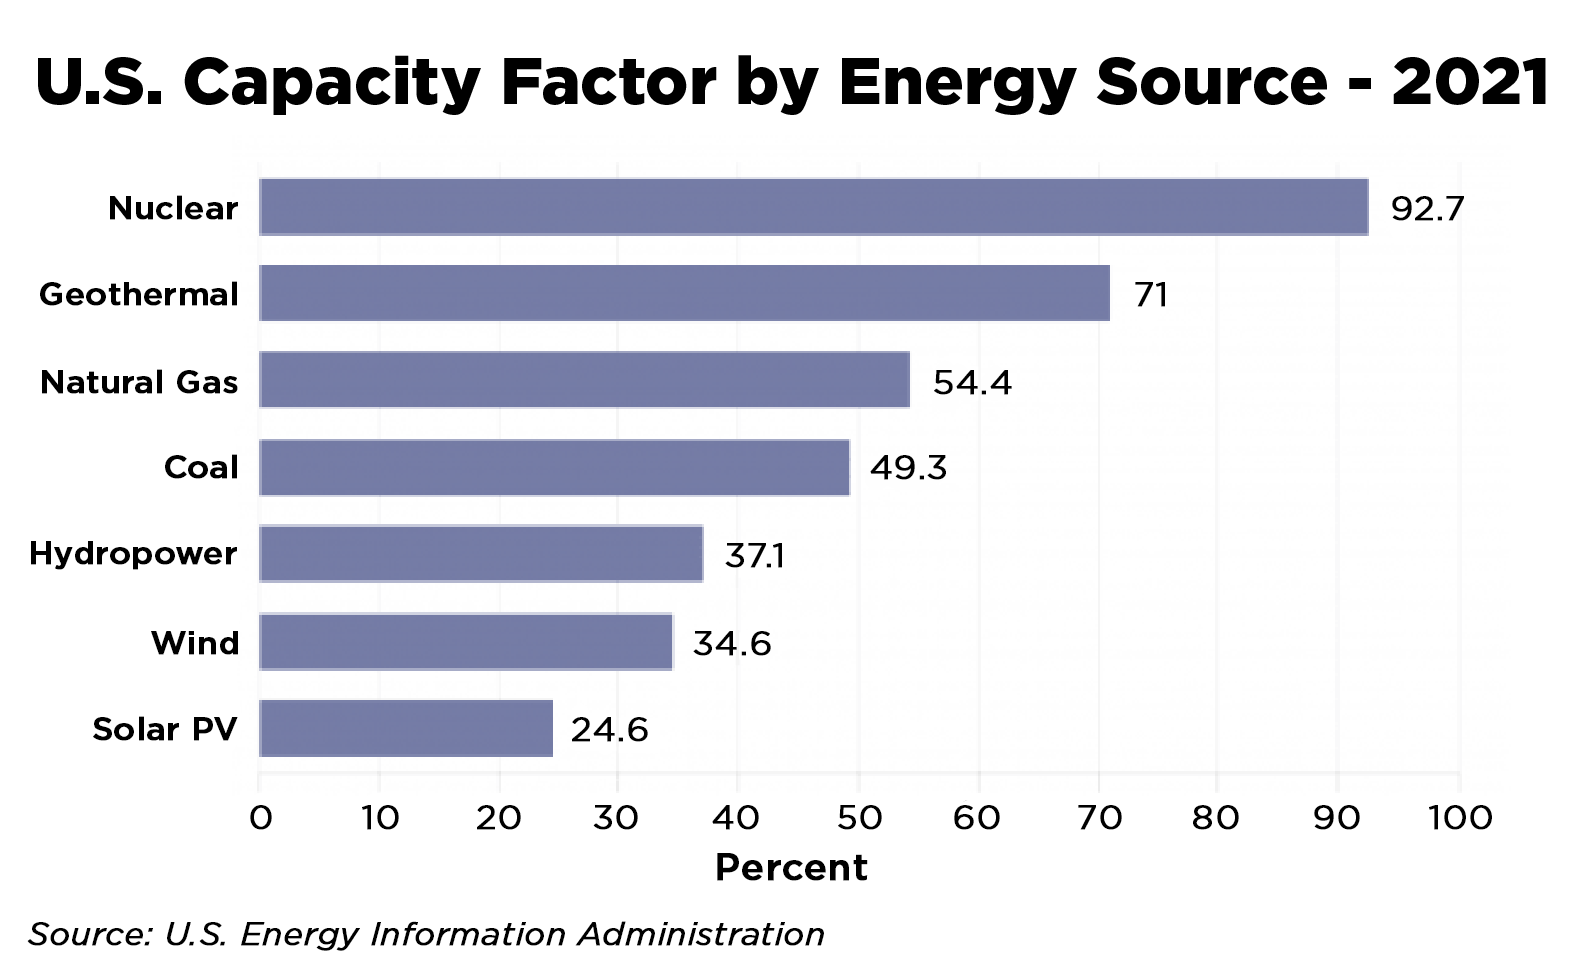 Chart showing U.S. Capacity Factor by Energy Source - 2021. Nuclear - 92.7%, Geothermal - 71%, Natural Gas - 54.4%, Coal - 49.3%, Hydropower - 37.1%, Wind - 34.6%, Solar PV - 24.6% | Source: U.S. Energy Information Administration